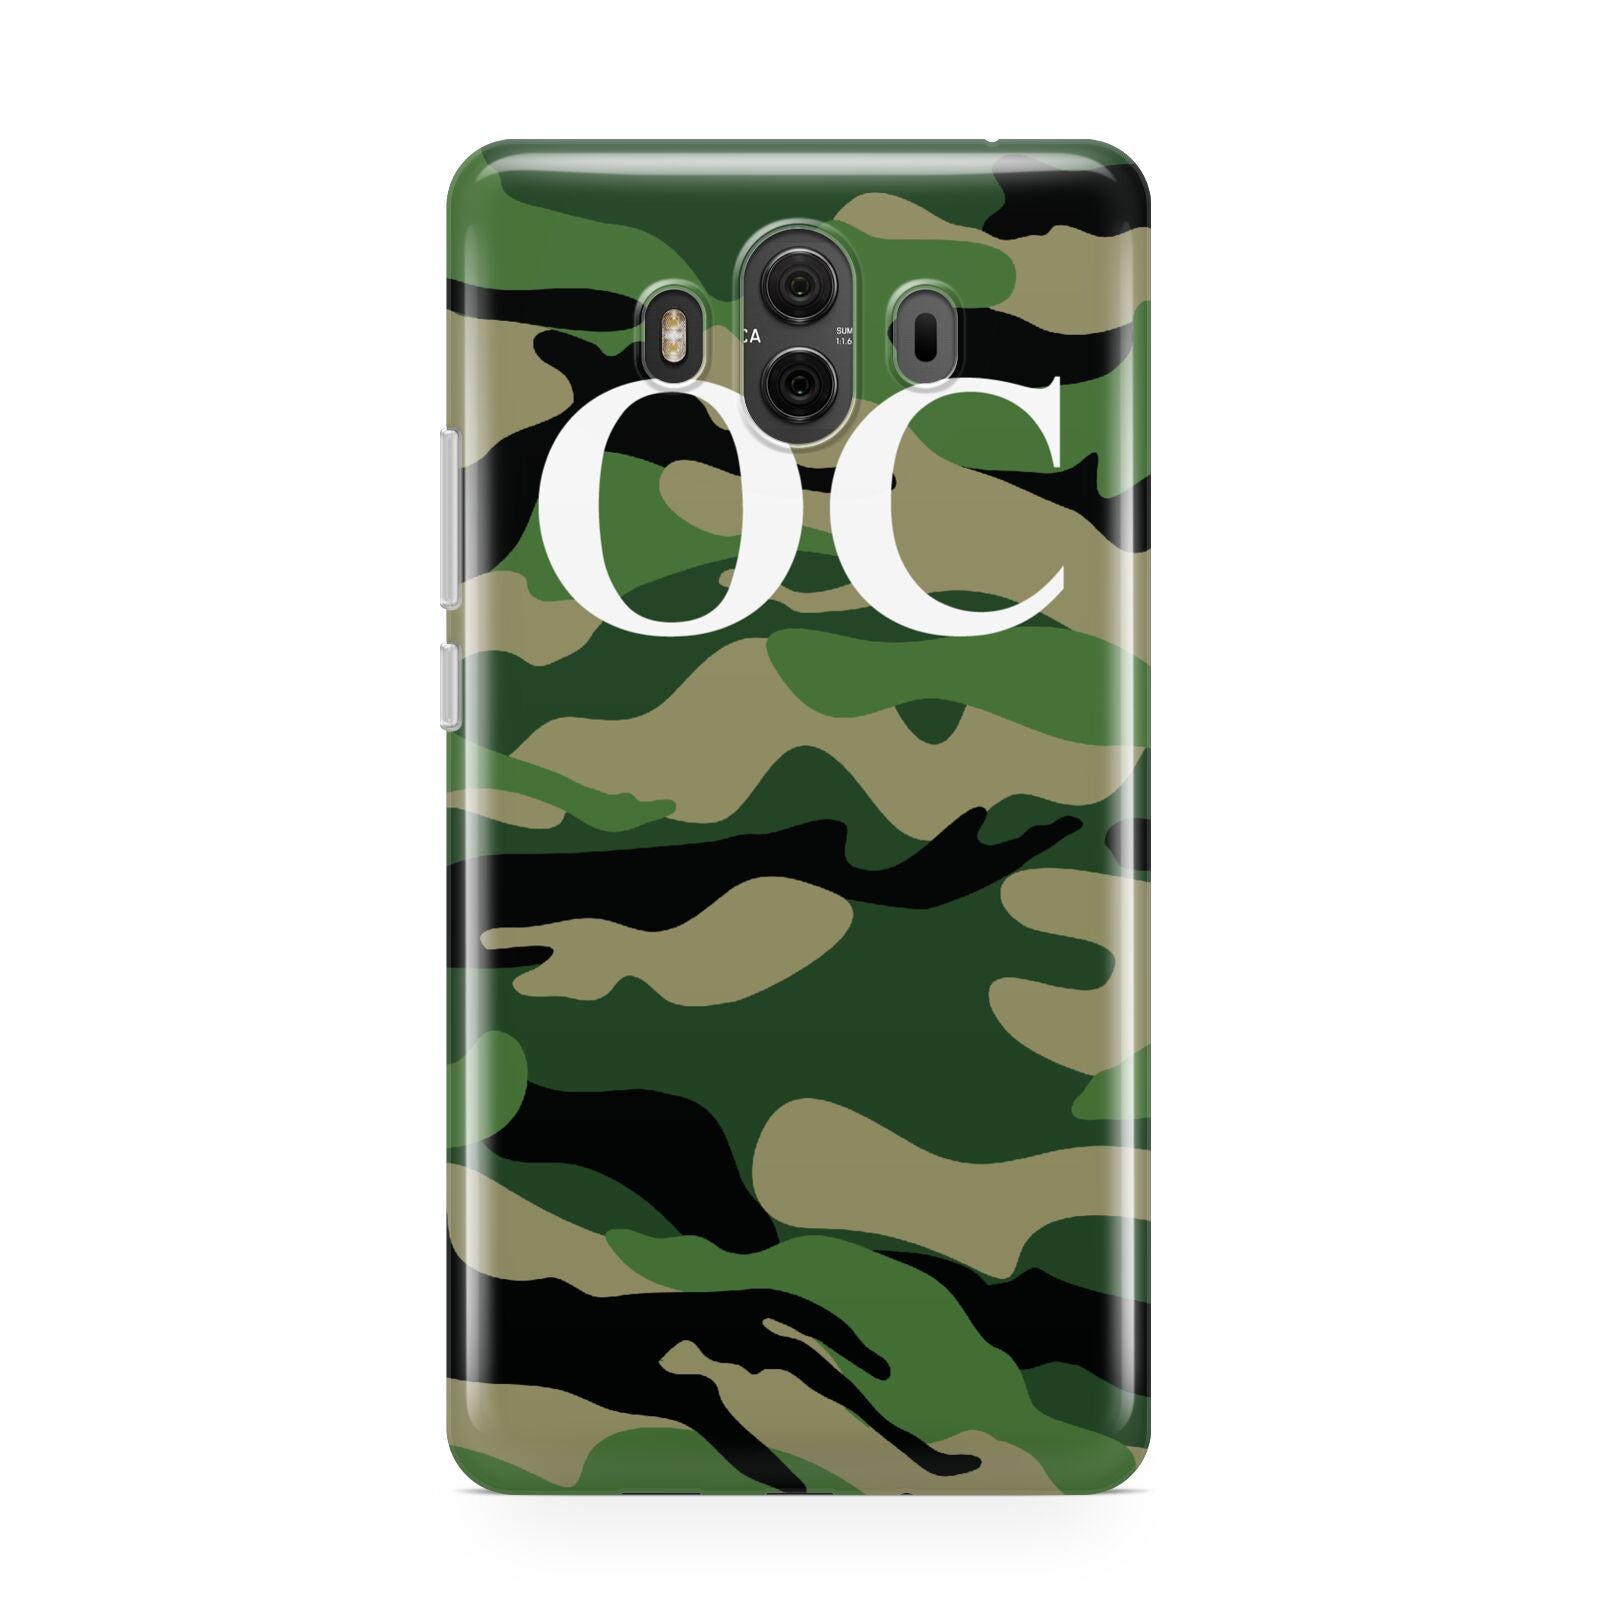 Personalised Camouflage Huawei Mate 10 Protective Phone Case